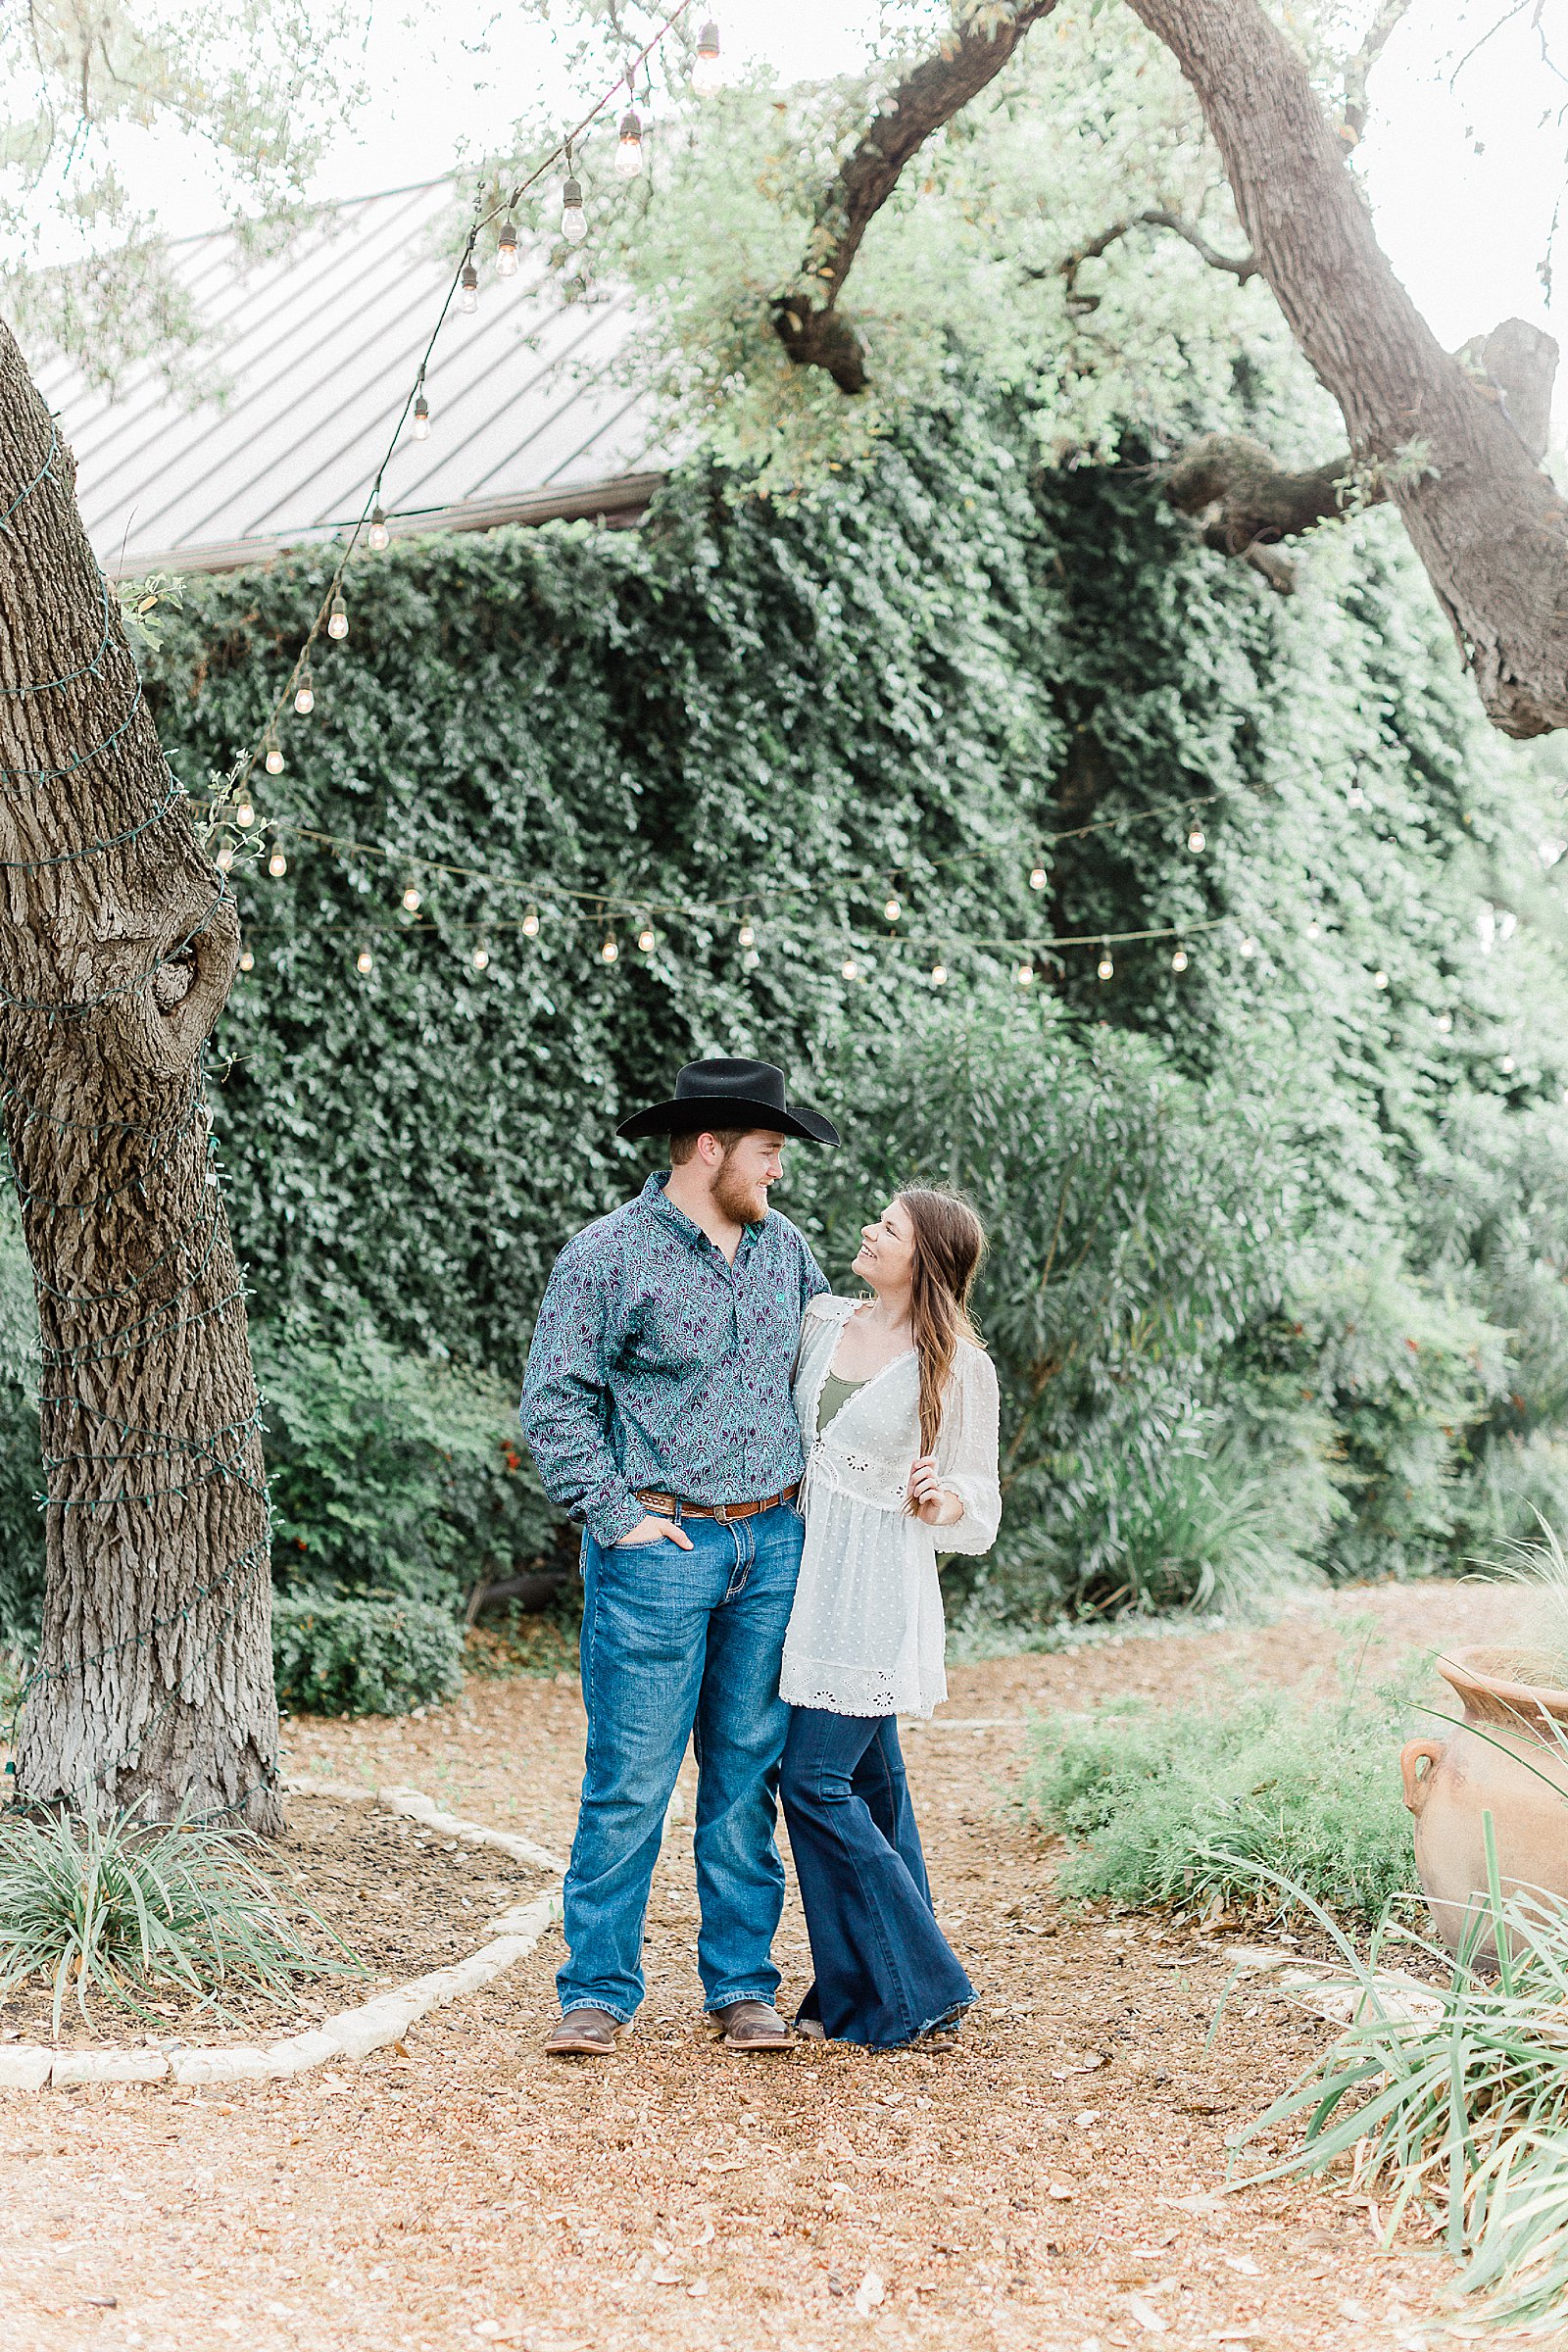 Gruene River Grill Engagement Session, Anna Kay Photography